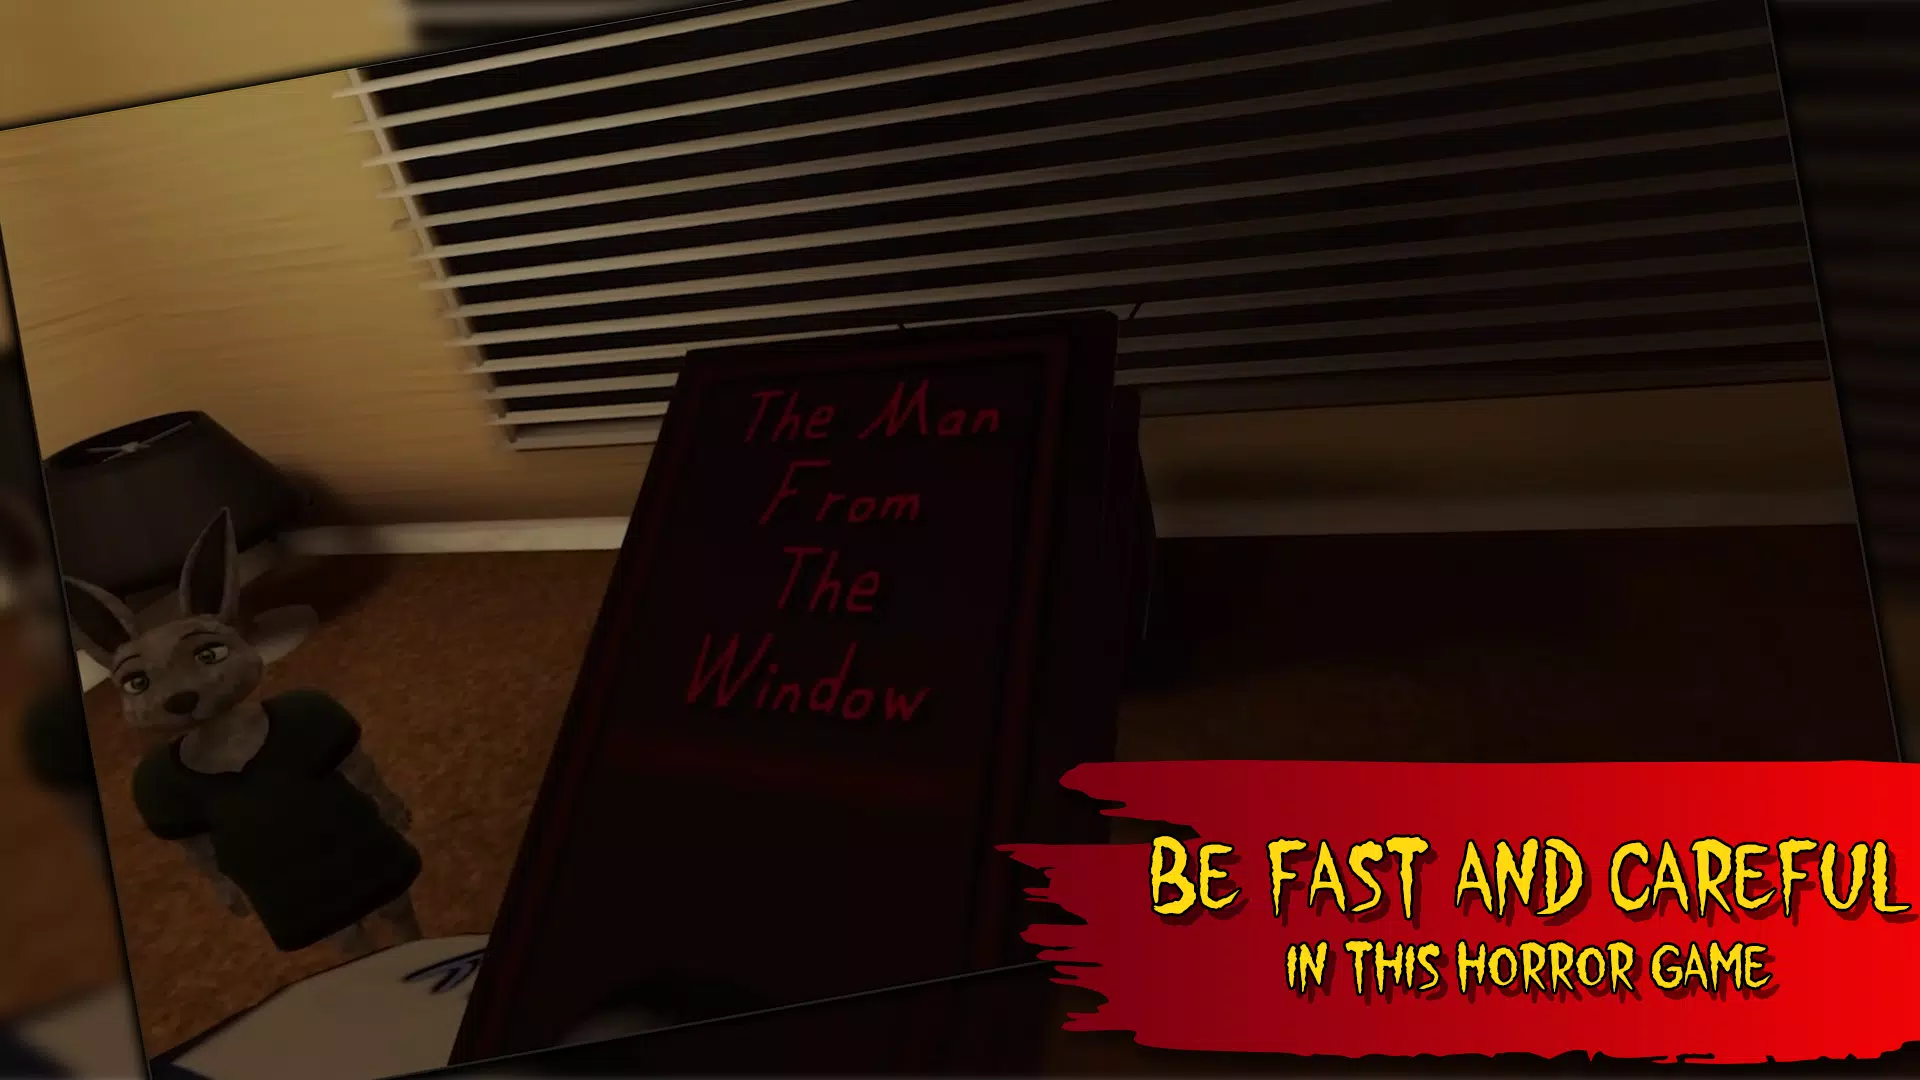 The Man from the Window Game APK (Android Game) - Free Download